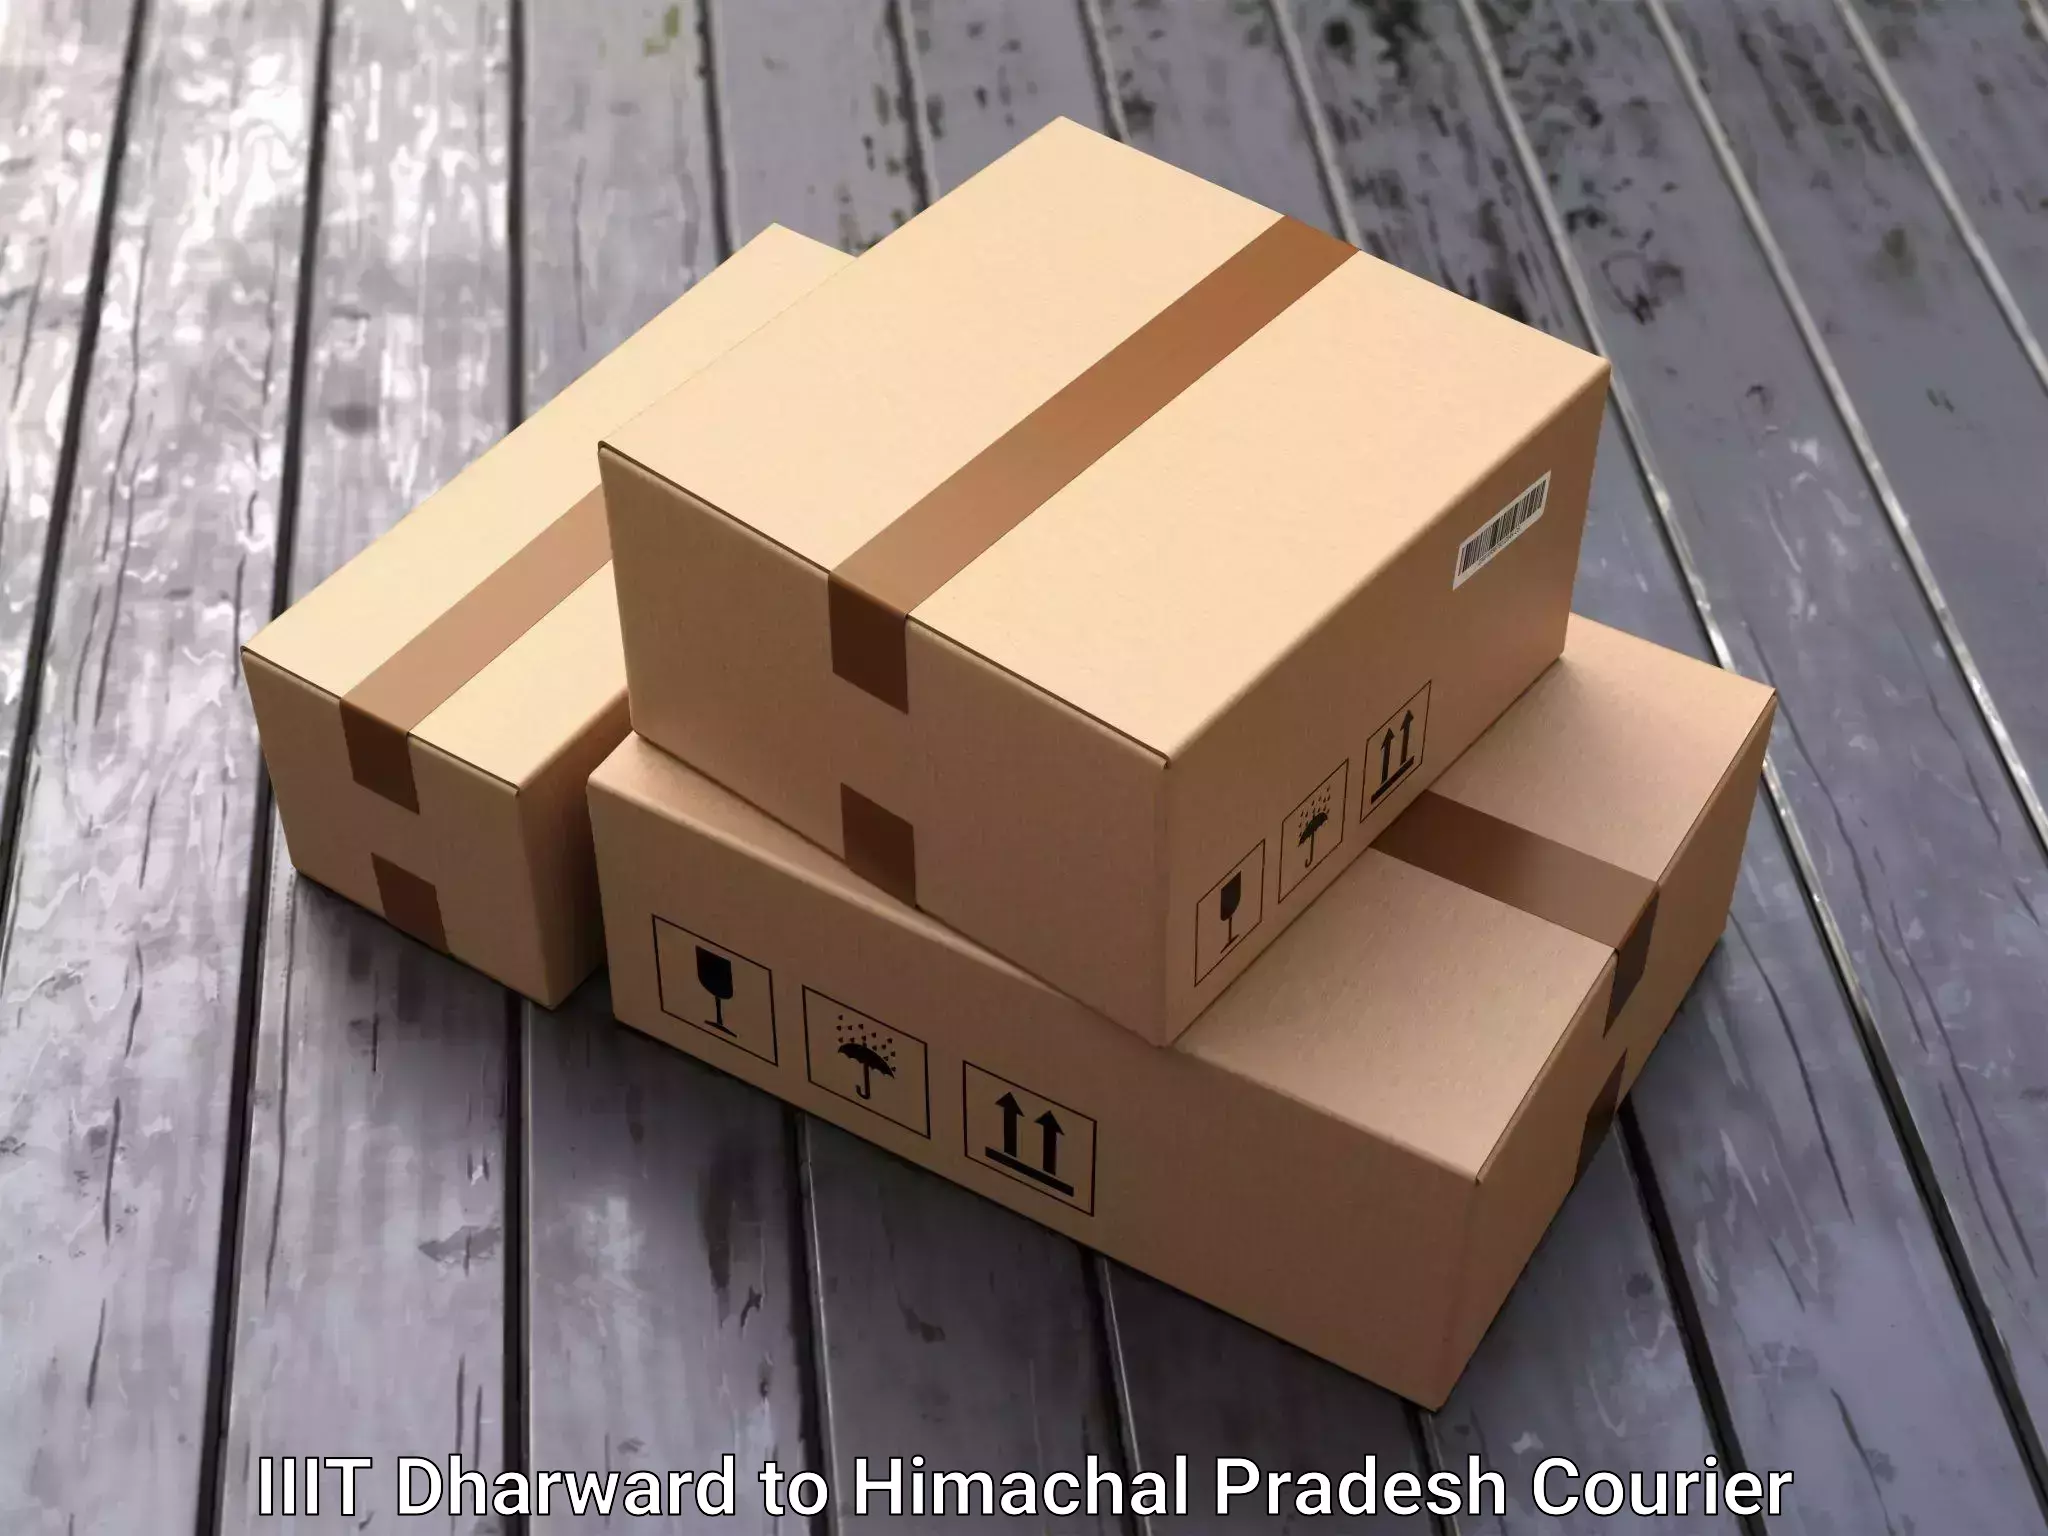 Quality relocation assistance IIIT Dharward to Himachal Pradesh